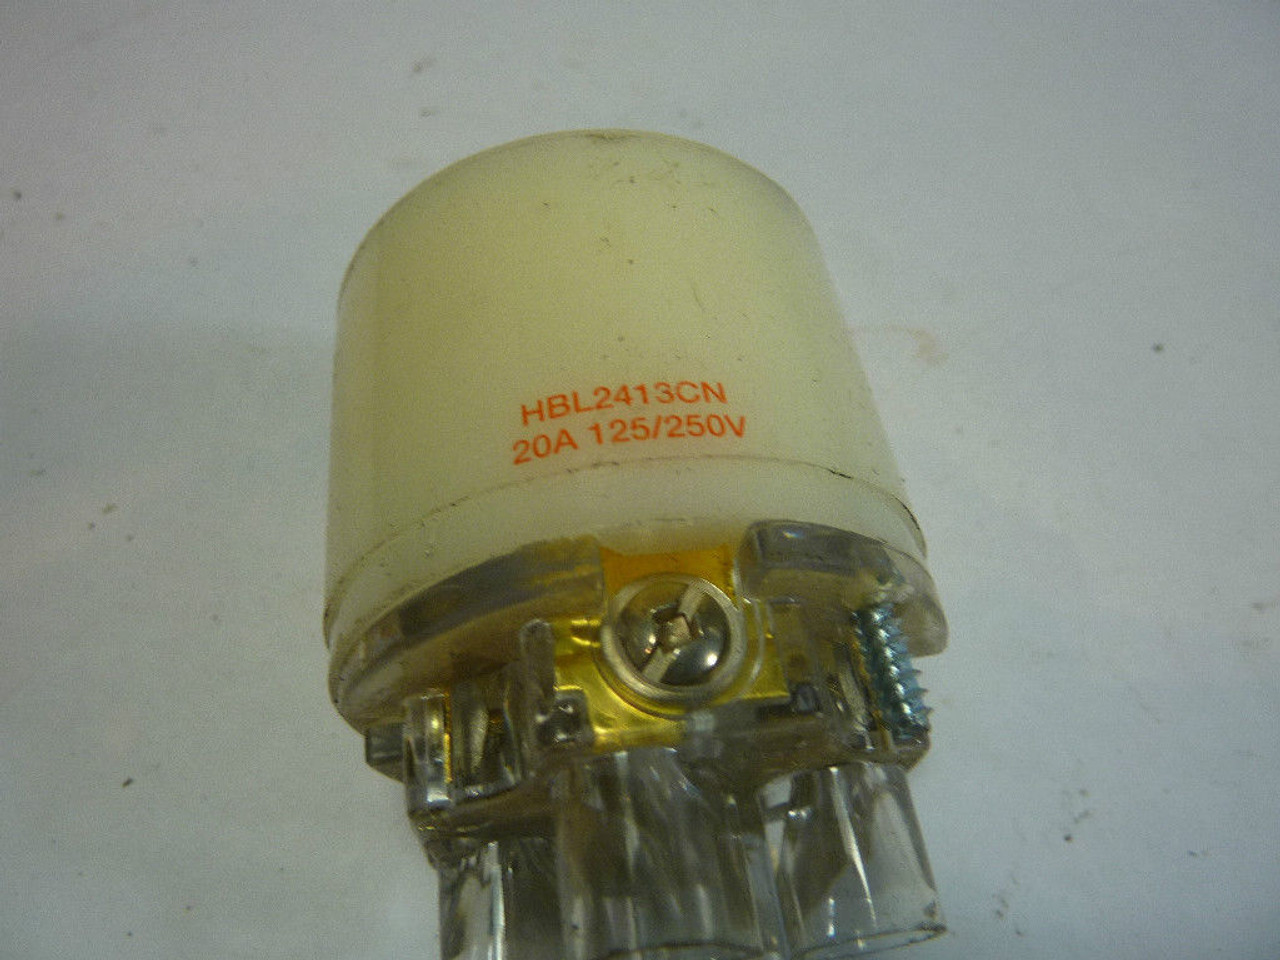 Hubbell HBL2413CN Receptacle 20 Amp 125V Top Only USED